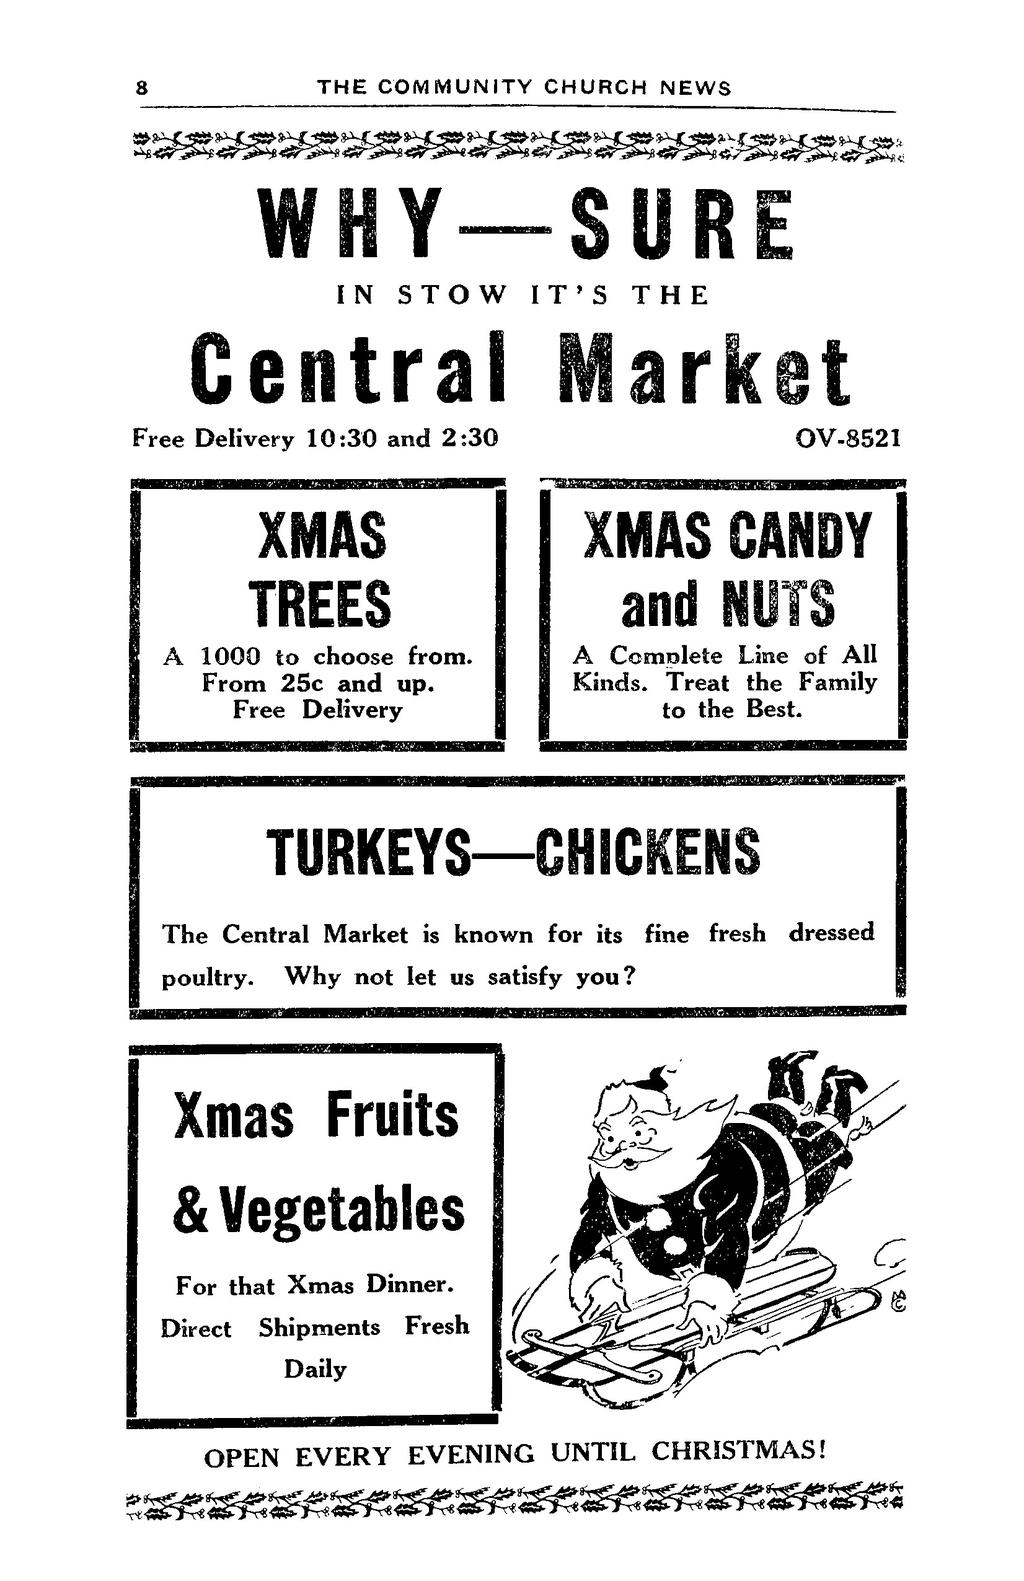 2 THE COMMUNITY CHURCH NEWS 560 WHY SURE IN STOW IT'S THE Central Market Free Delivery 10:30 and 2:30 OV-8521 XMAS TREES A 1000 to choose from. From 25c and up.